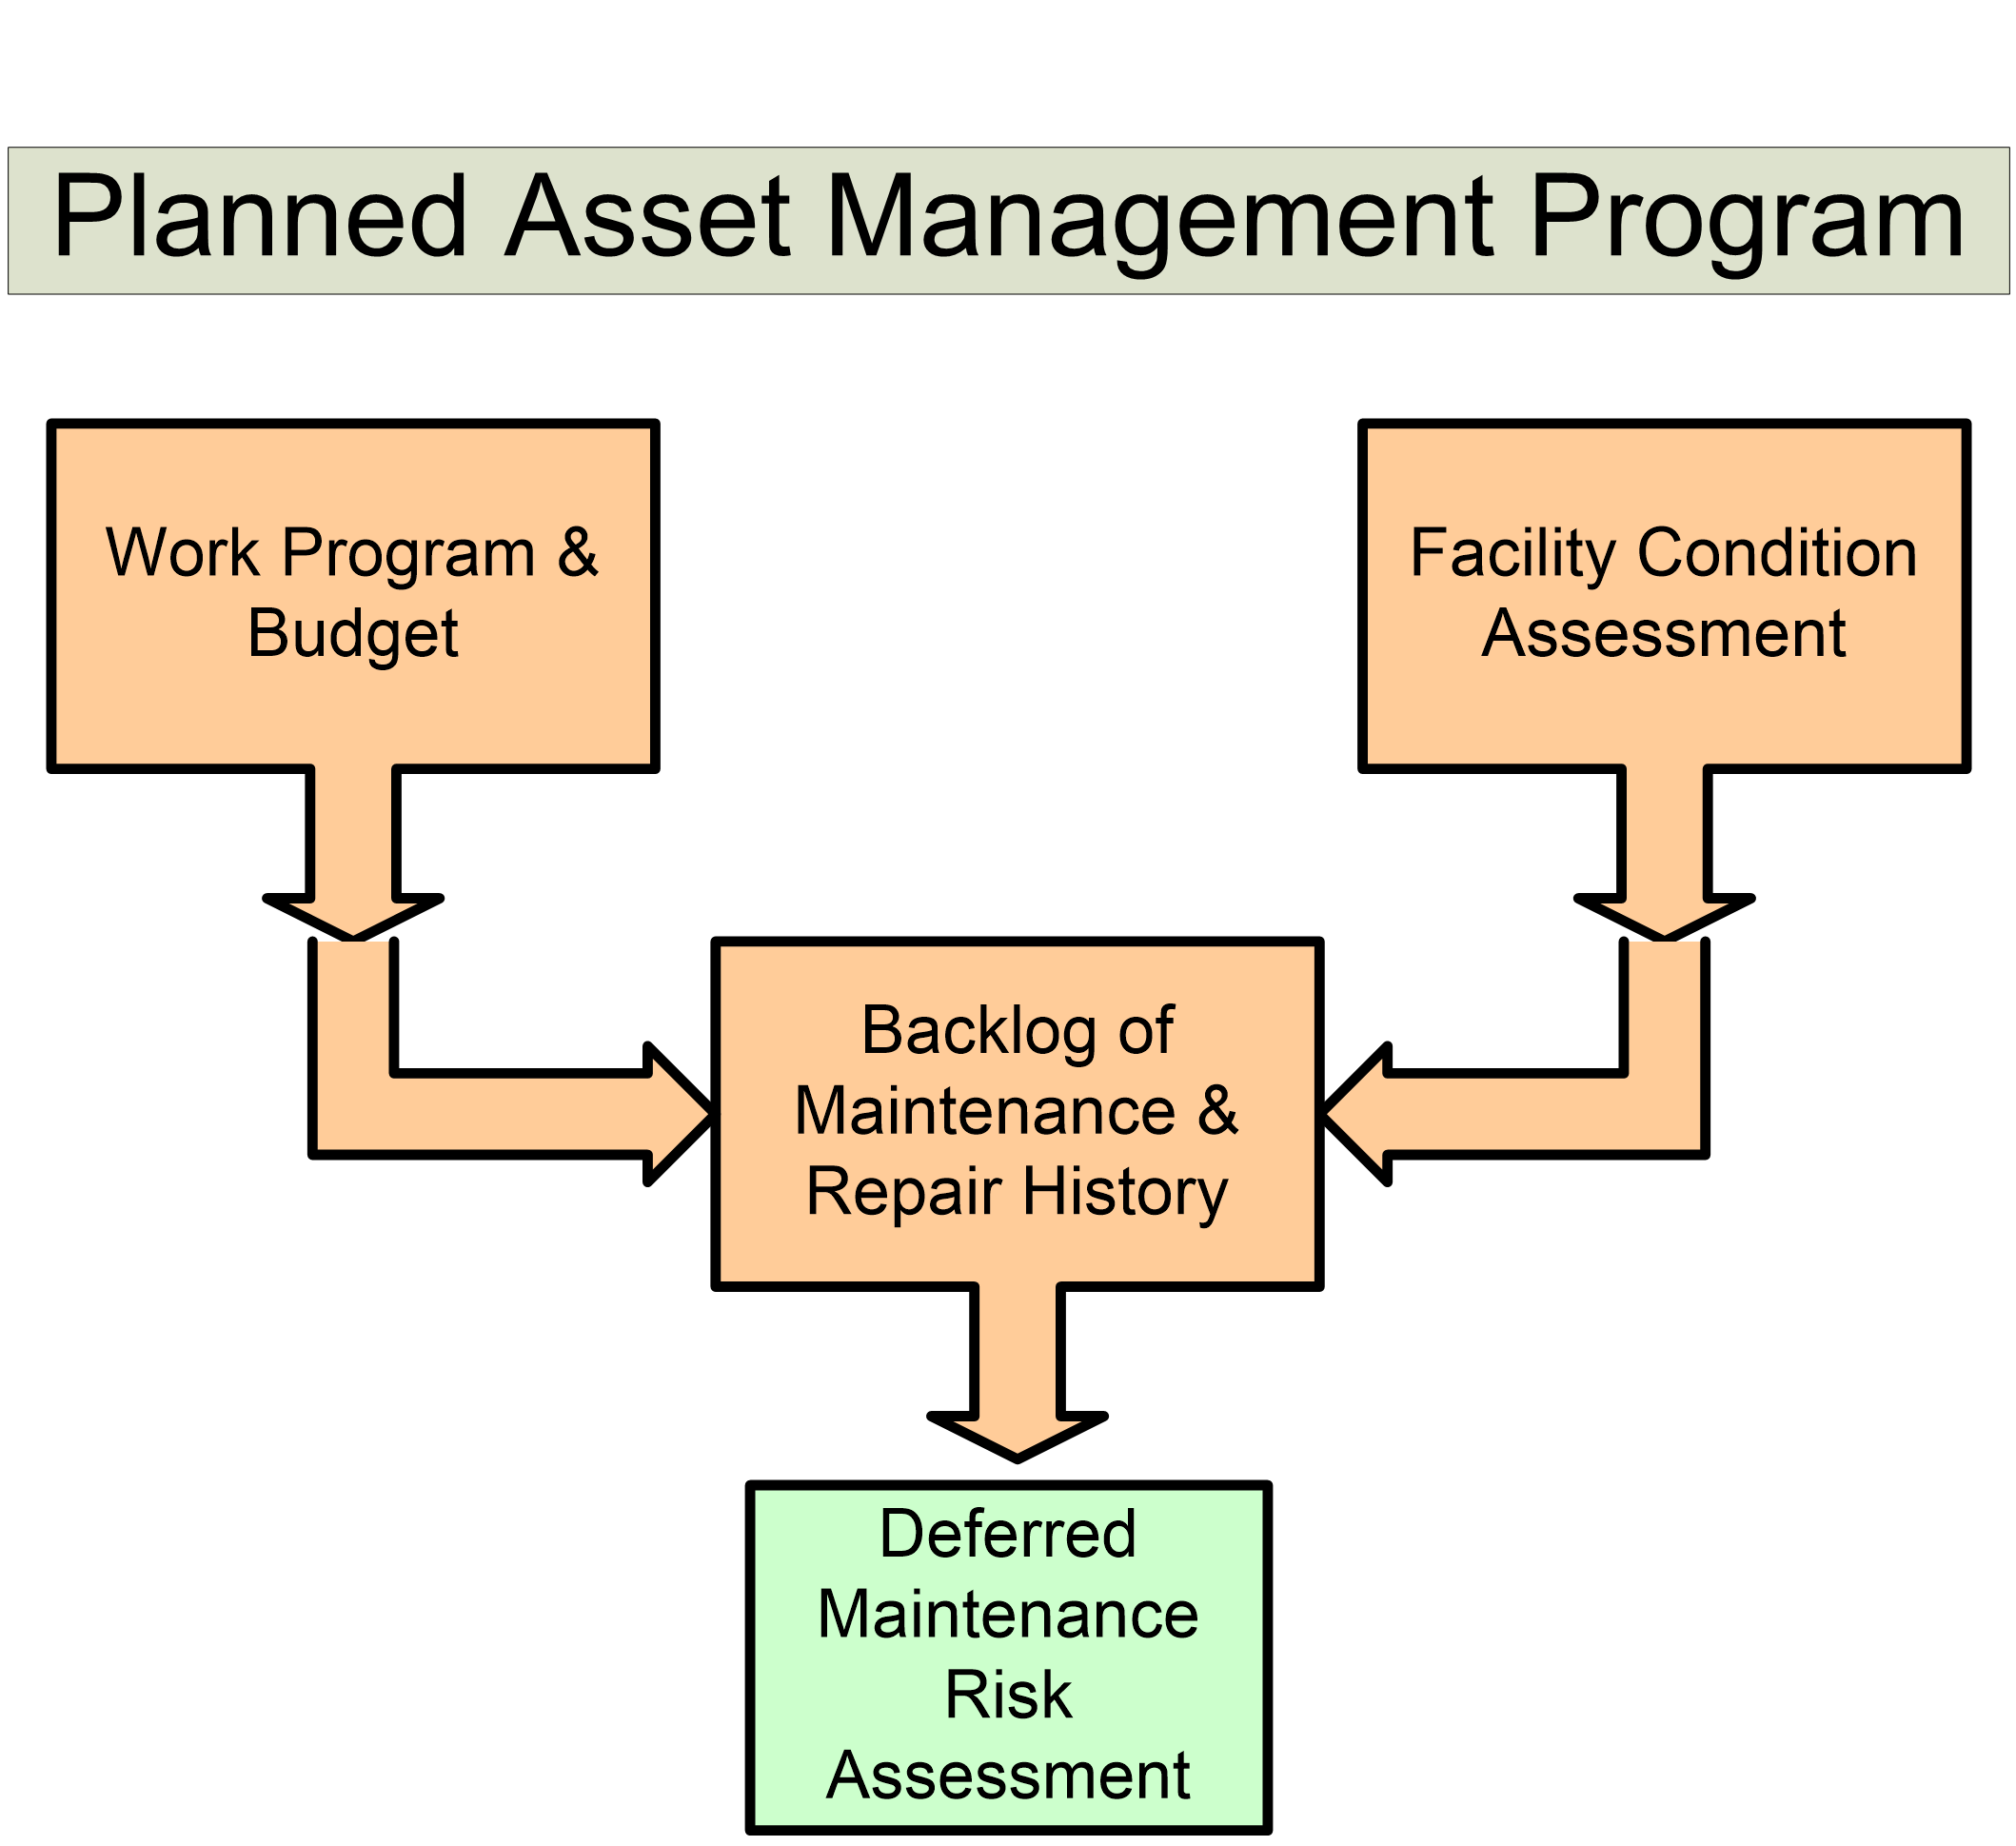 Why Tracking and Reporting on Backlog of Maintenance and Repair (BMAR) Is So Important